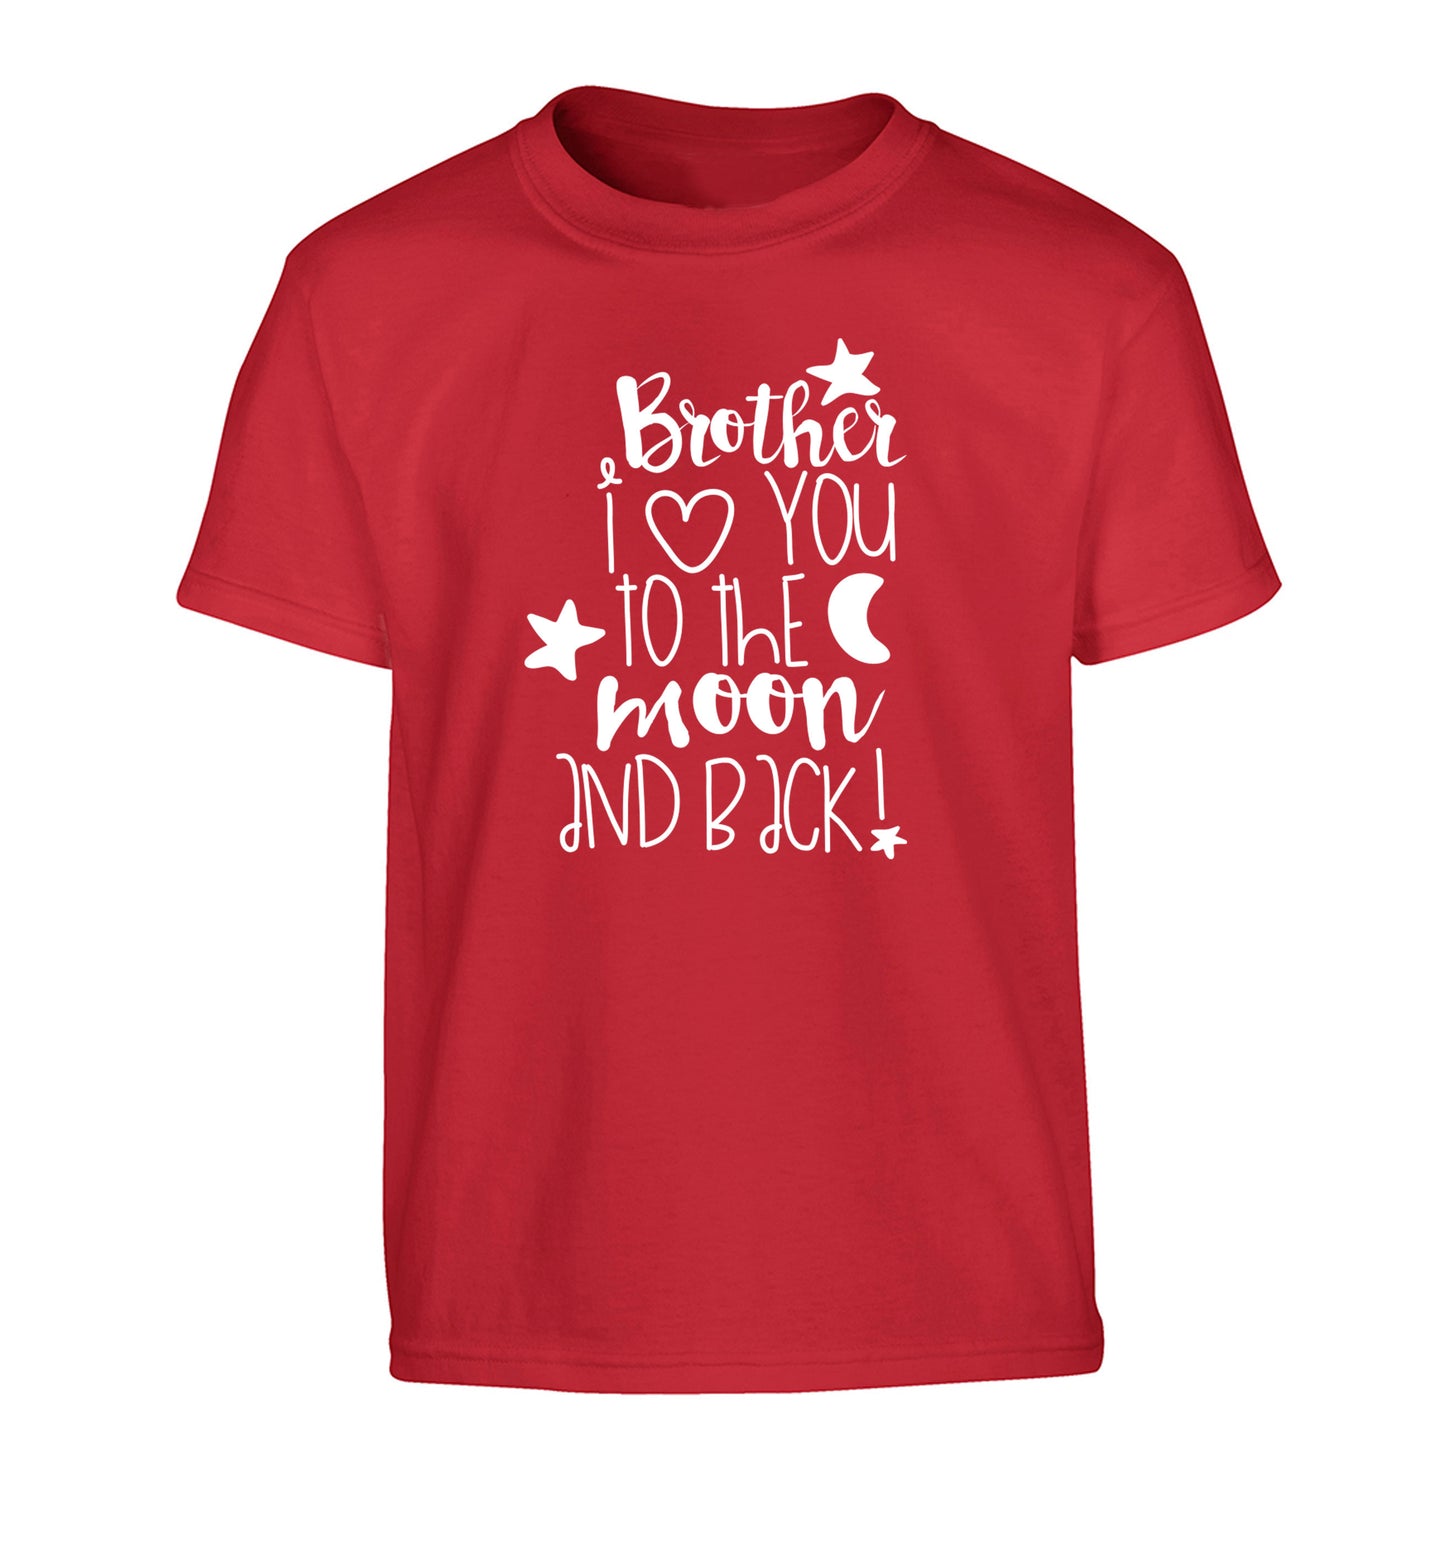 Brother I love you to the moon and back Children's red Tshirt 12-14 Years